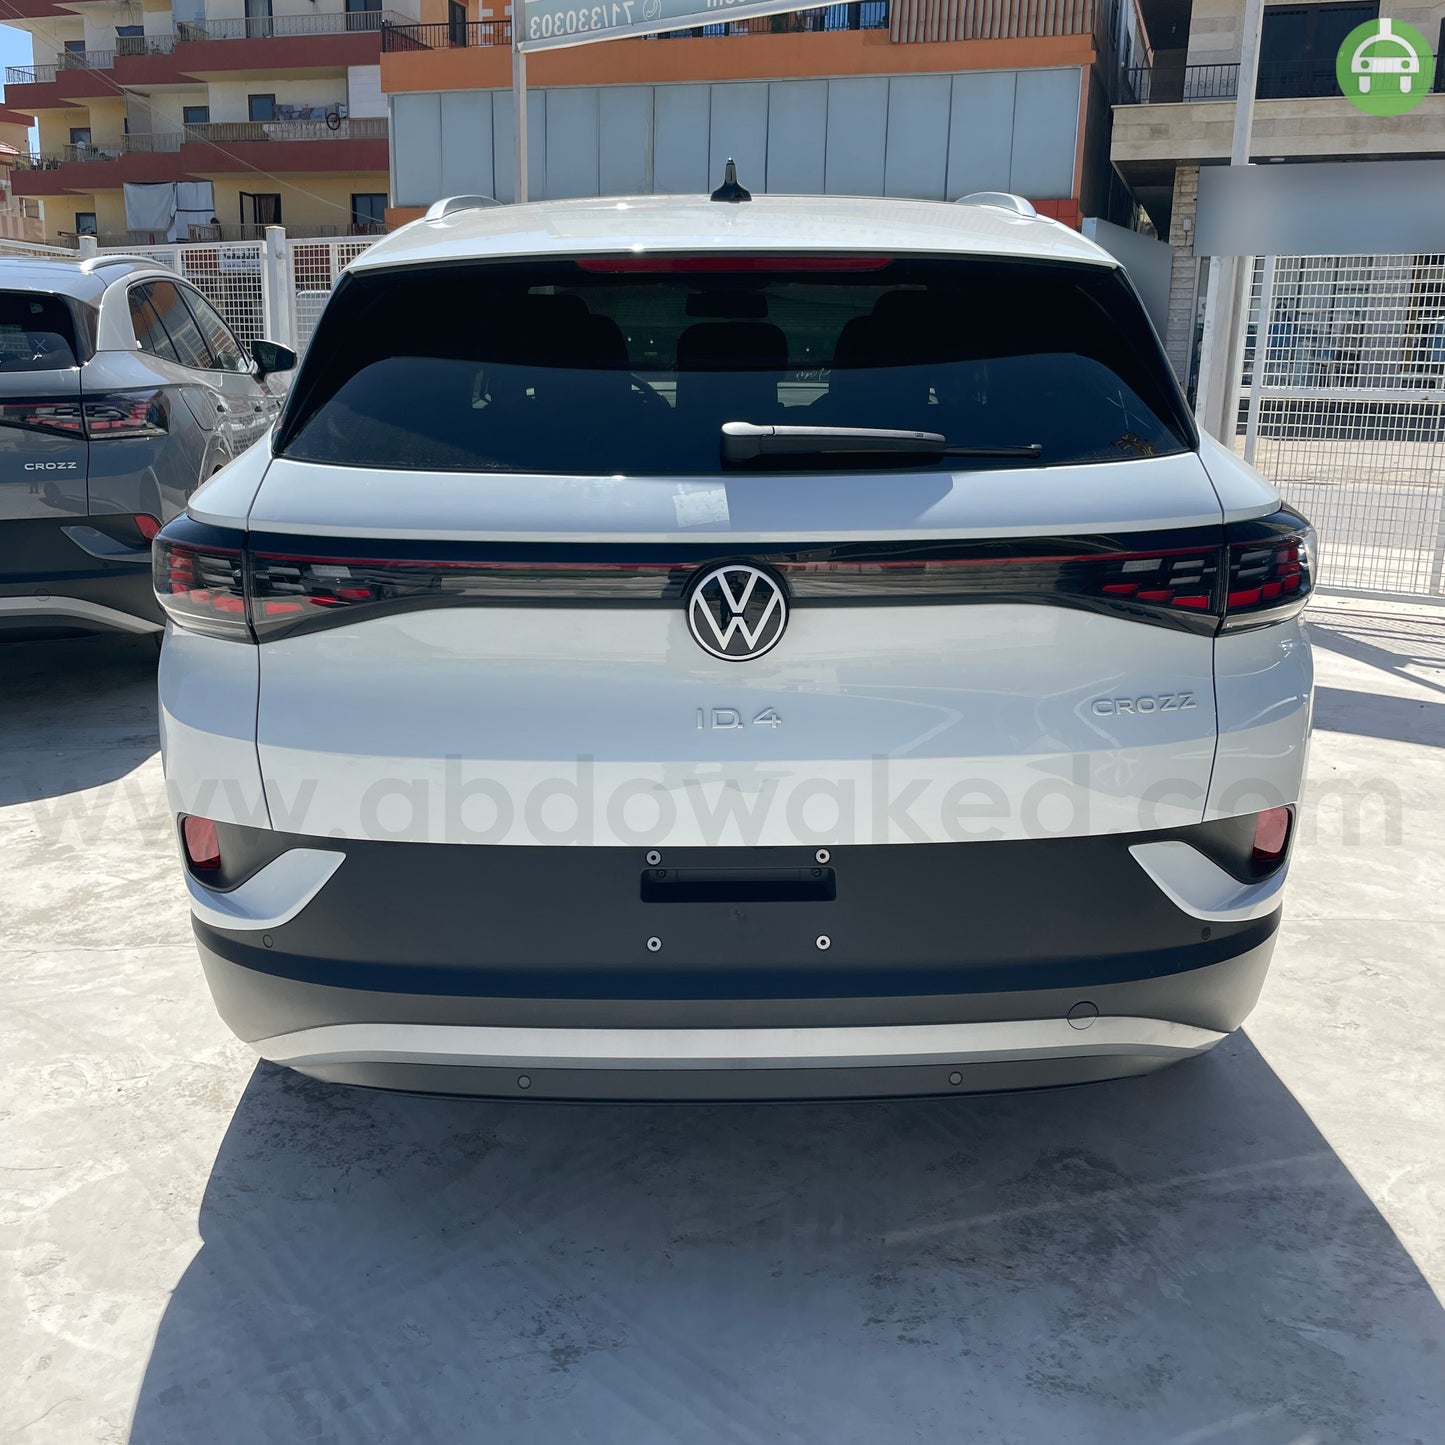 VW ID4 Crozz Pure+ 2022 White Color 550km Range/Charge Fully Electric Car (New - 0KM)